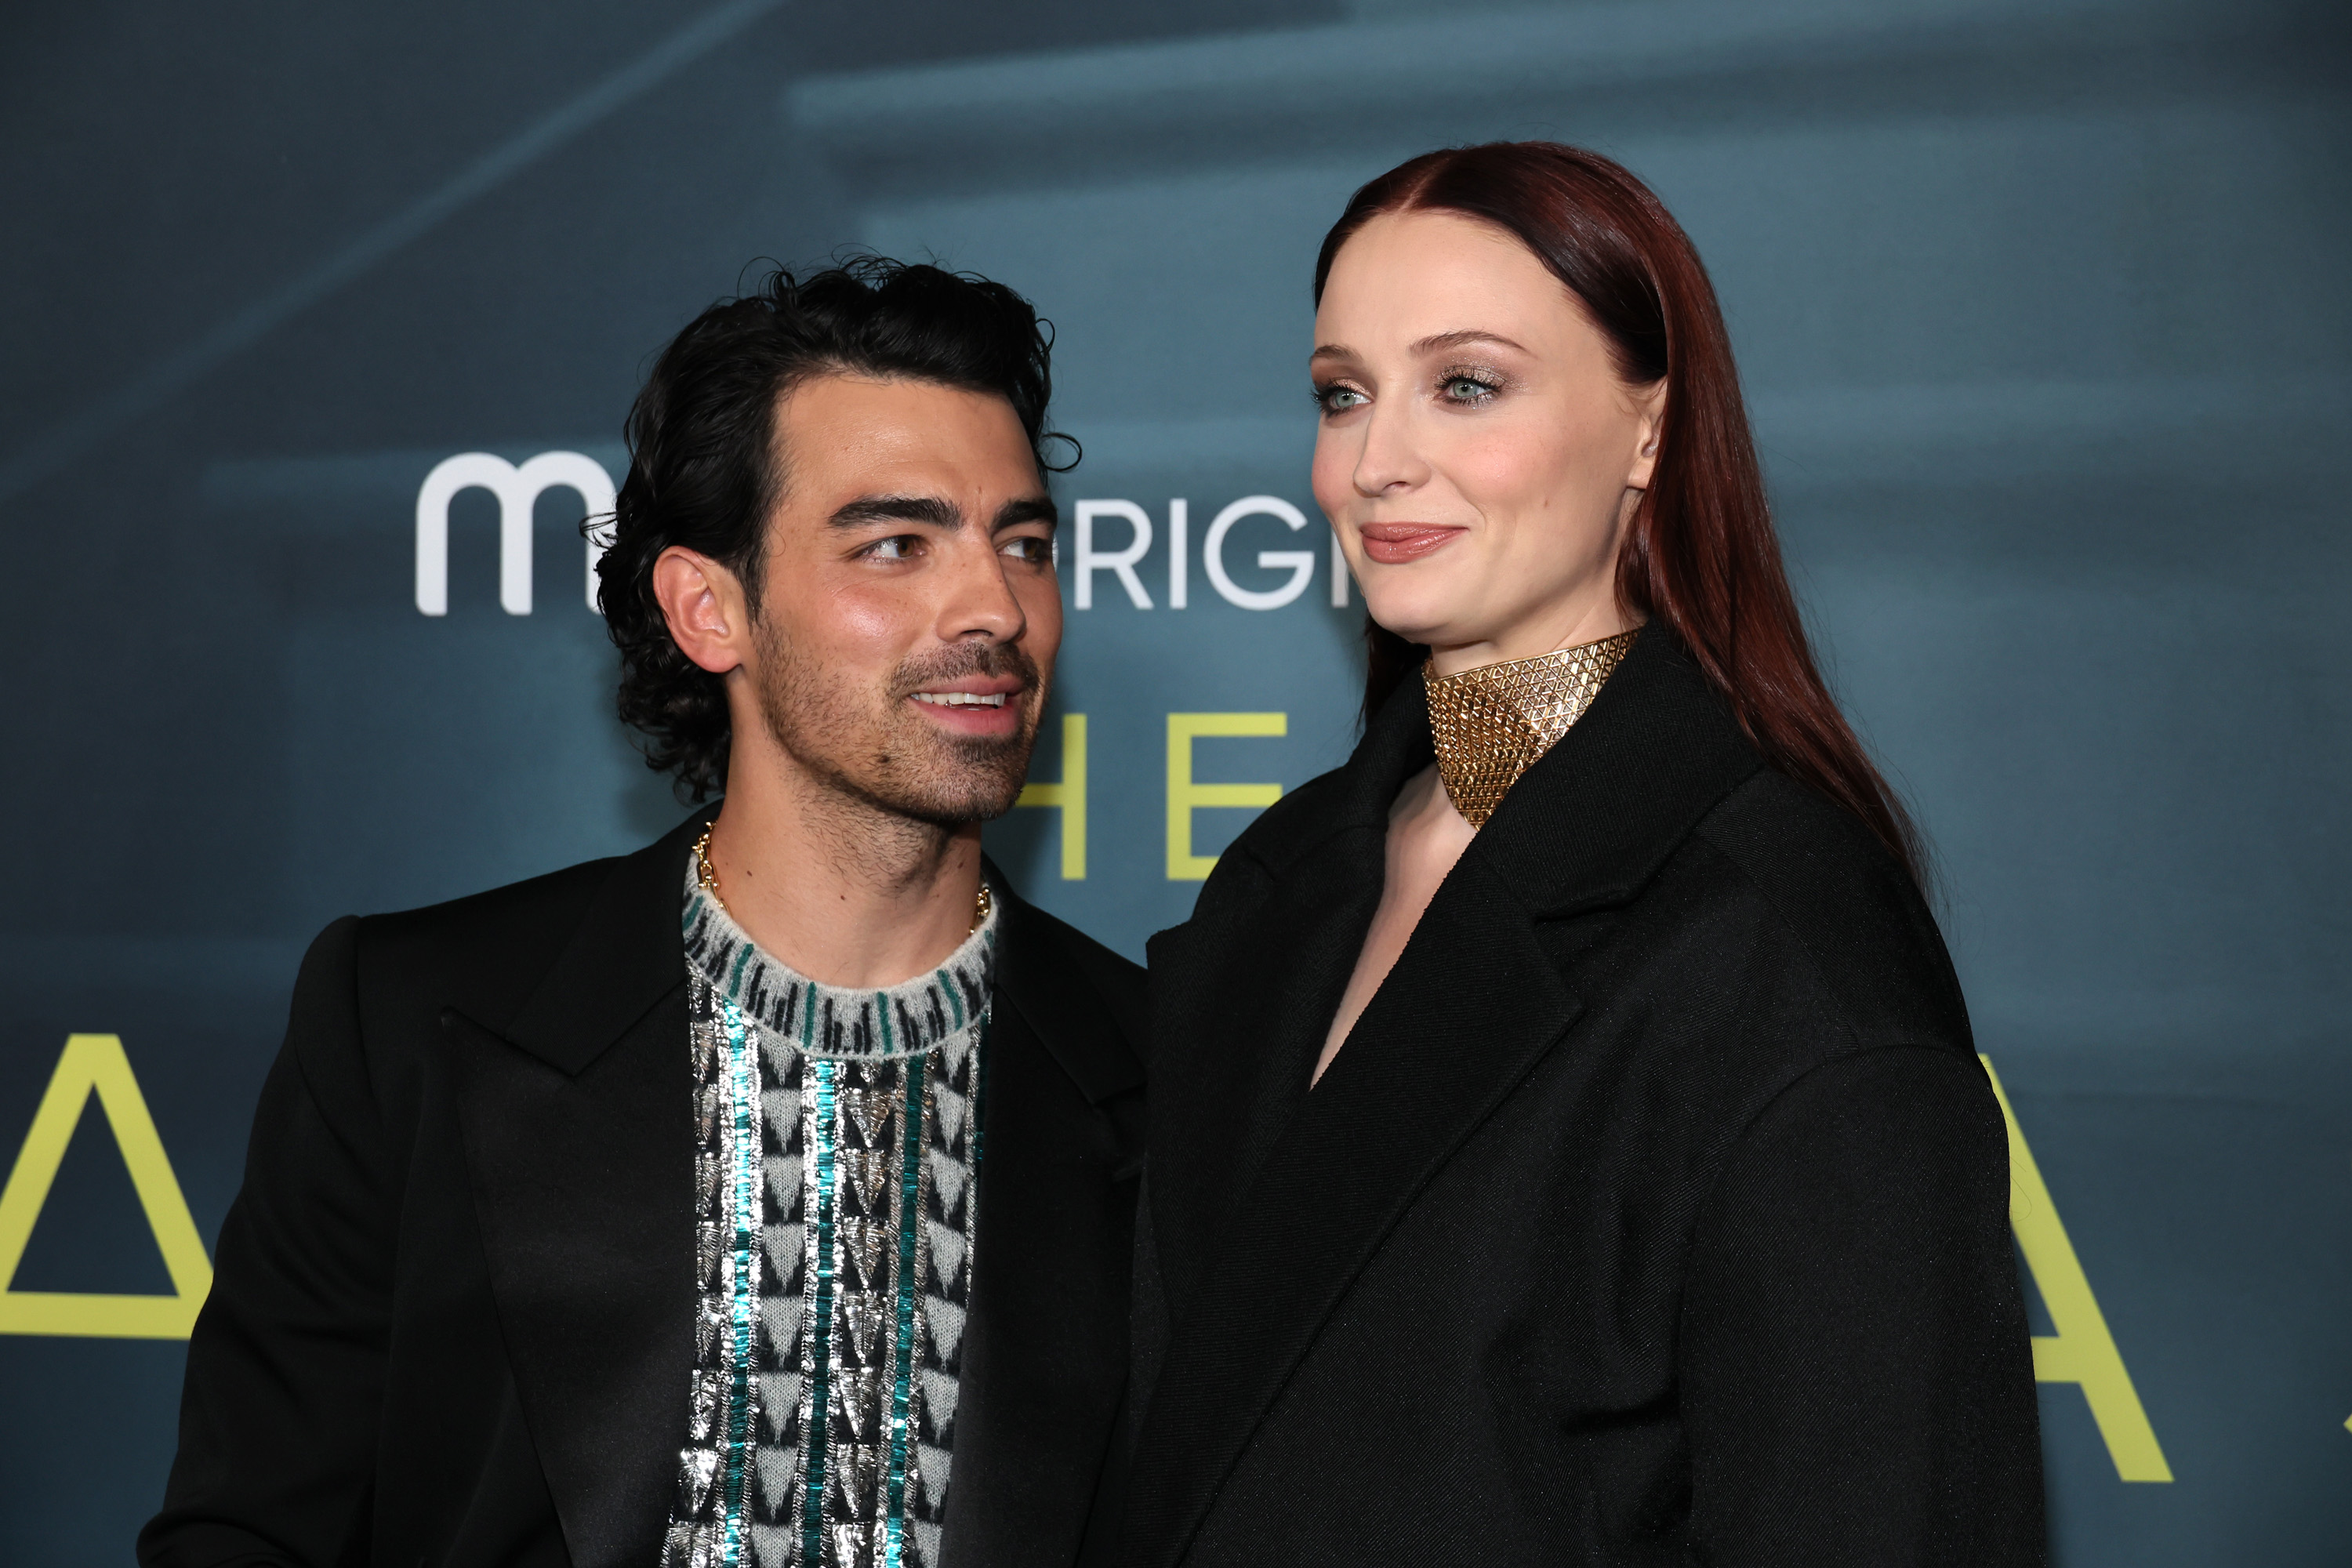 Joe Jonas and Sophie Turner at HBO Max's "The Staircase" premiere in New York City on May 3, 2022 | Source: Getty Images